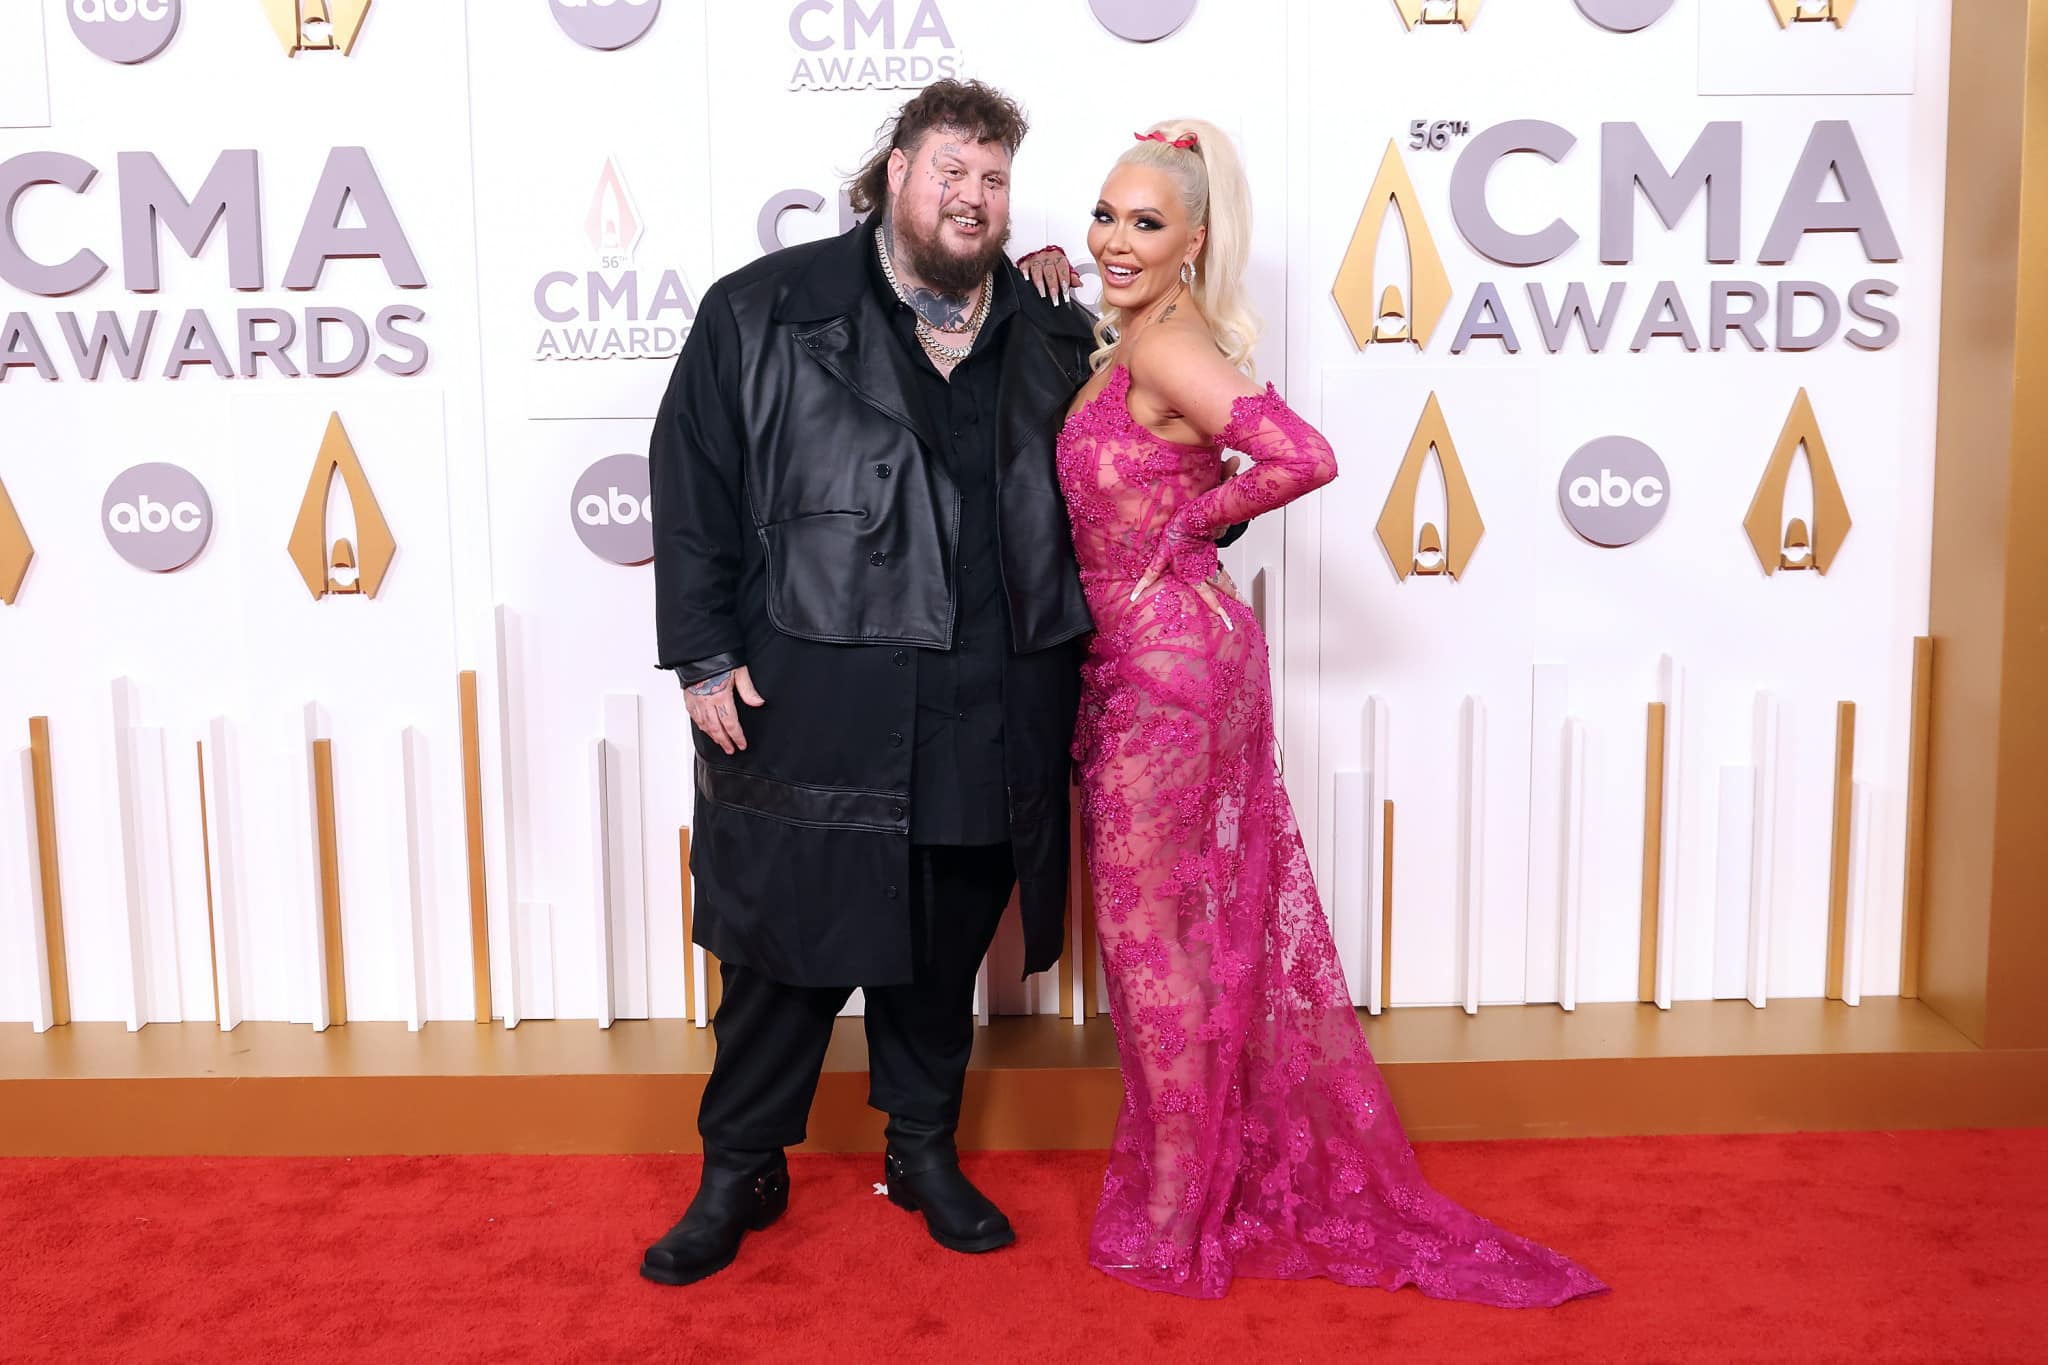 Jelly Roll and Bunnie Xo attend the 56th Annual CMA Awards.